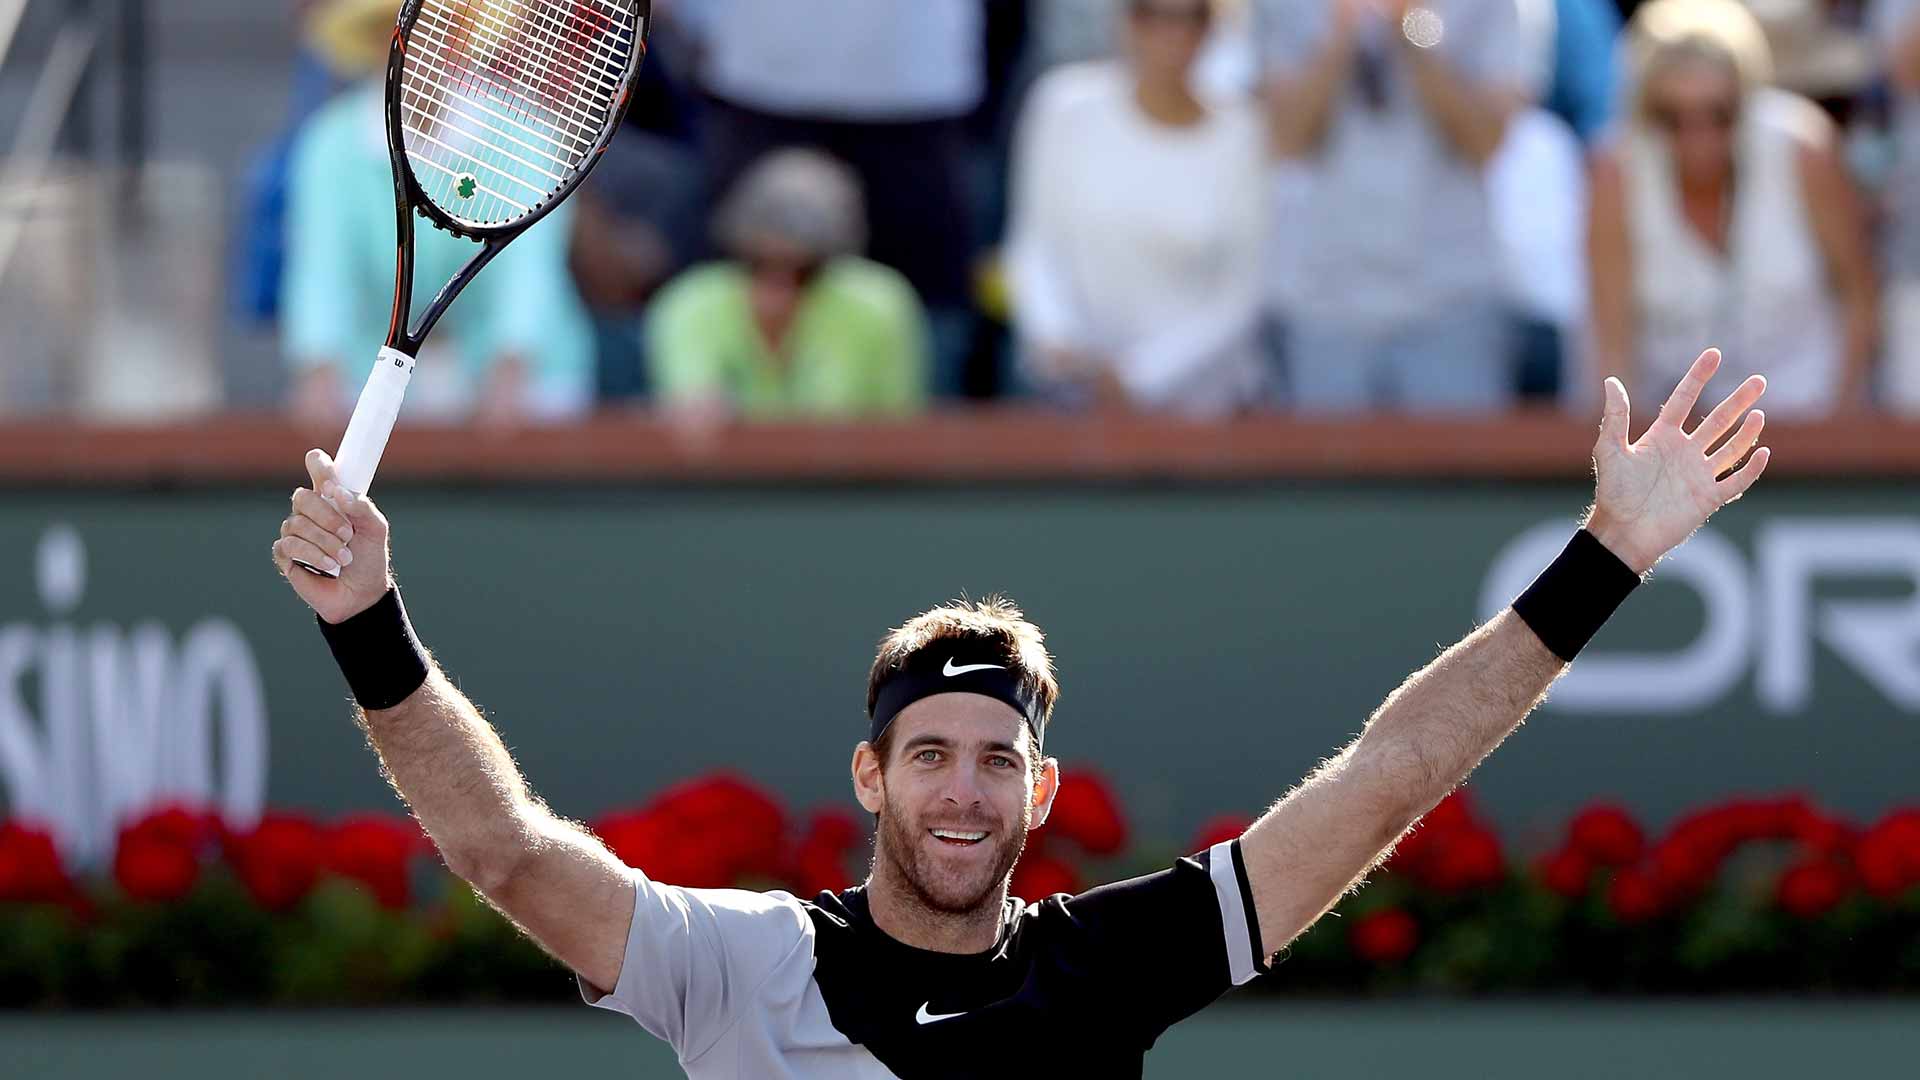 Juan Martin del Potro saved three championship points to lift the Indian Wells trophy in 2018.